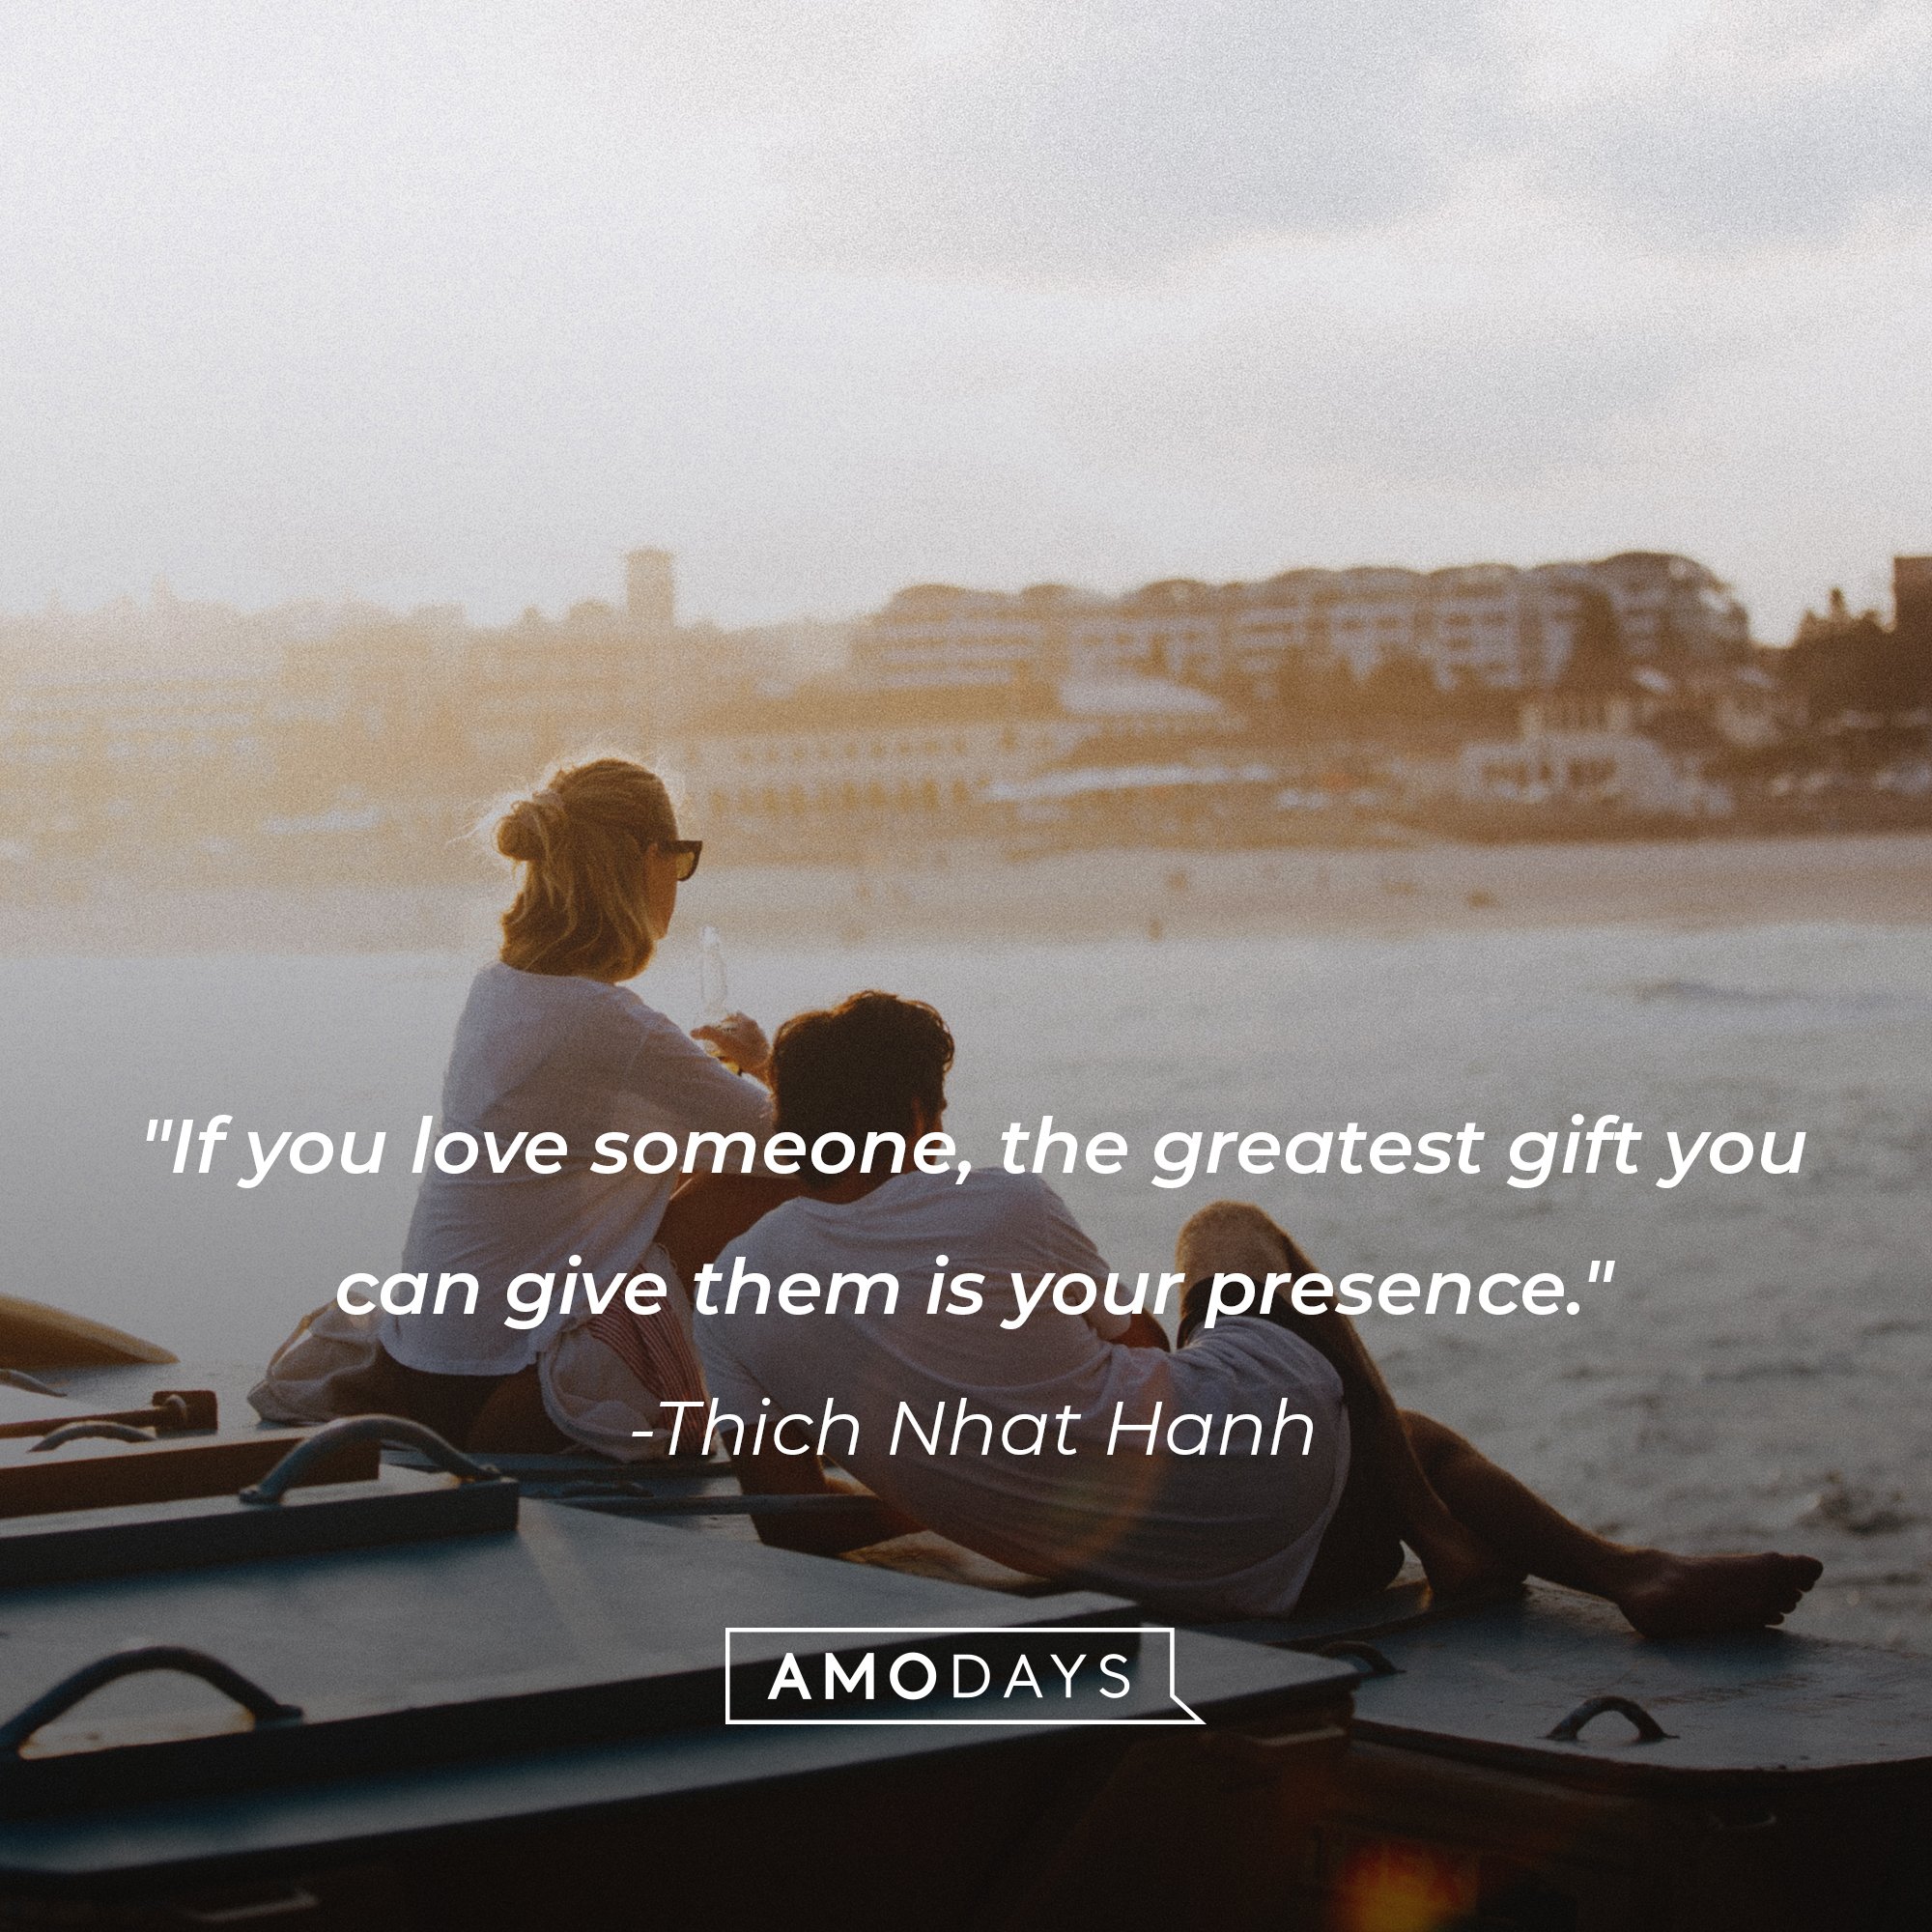 Thich Nhat Hanh’s quote: "If you love someone, the greatest gift you can give them is your presence." | Image: AmoDays 